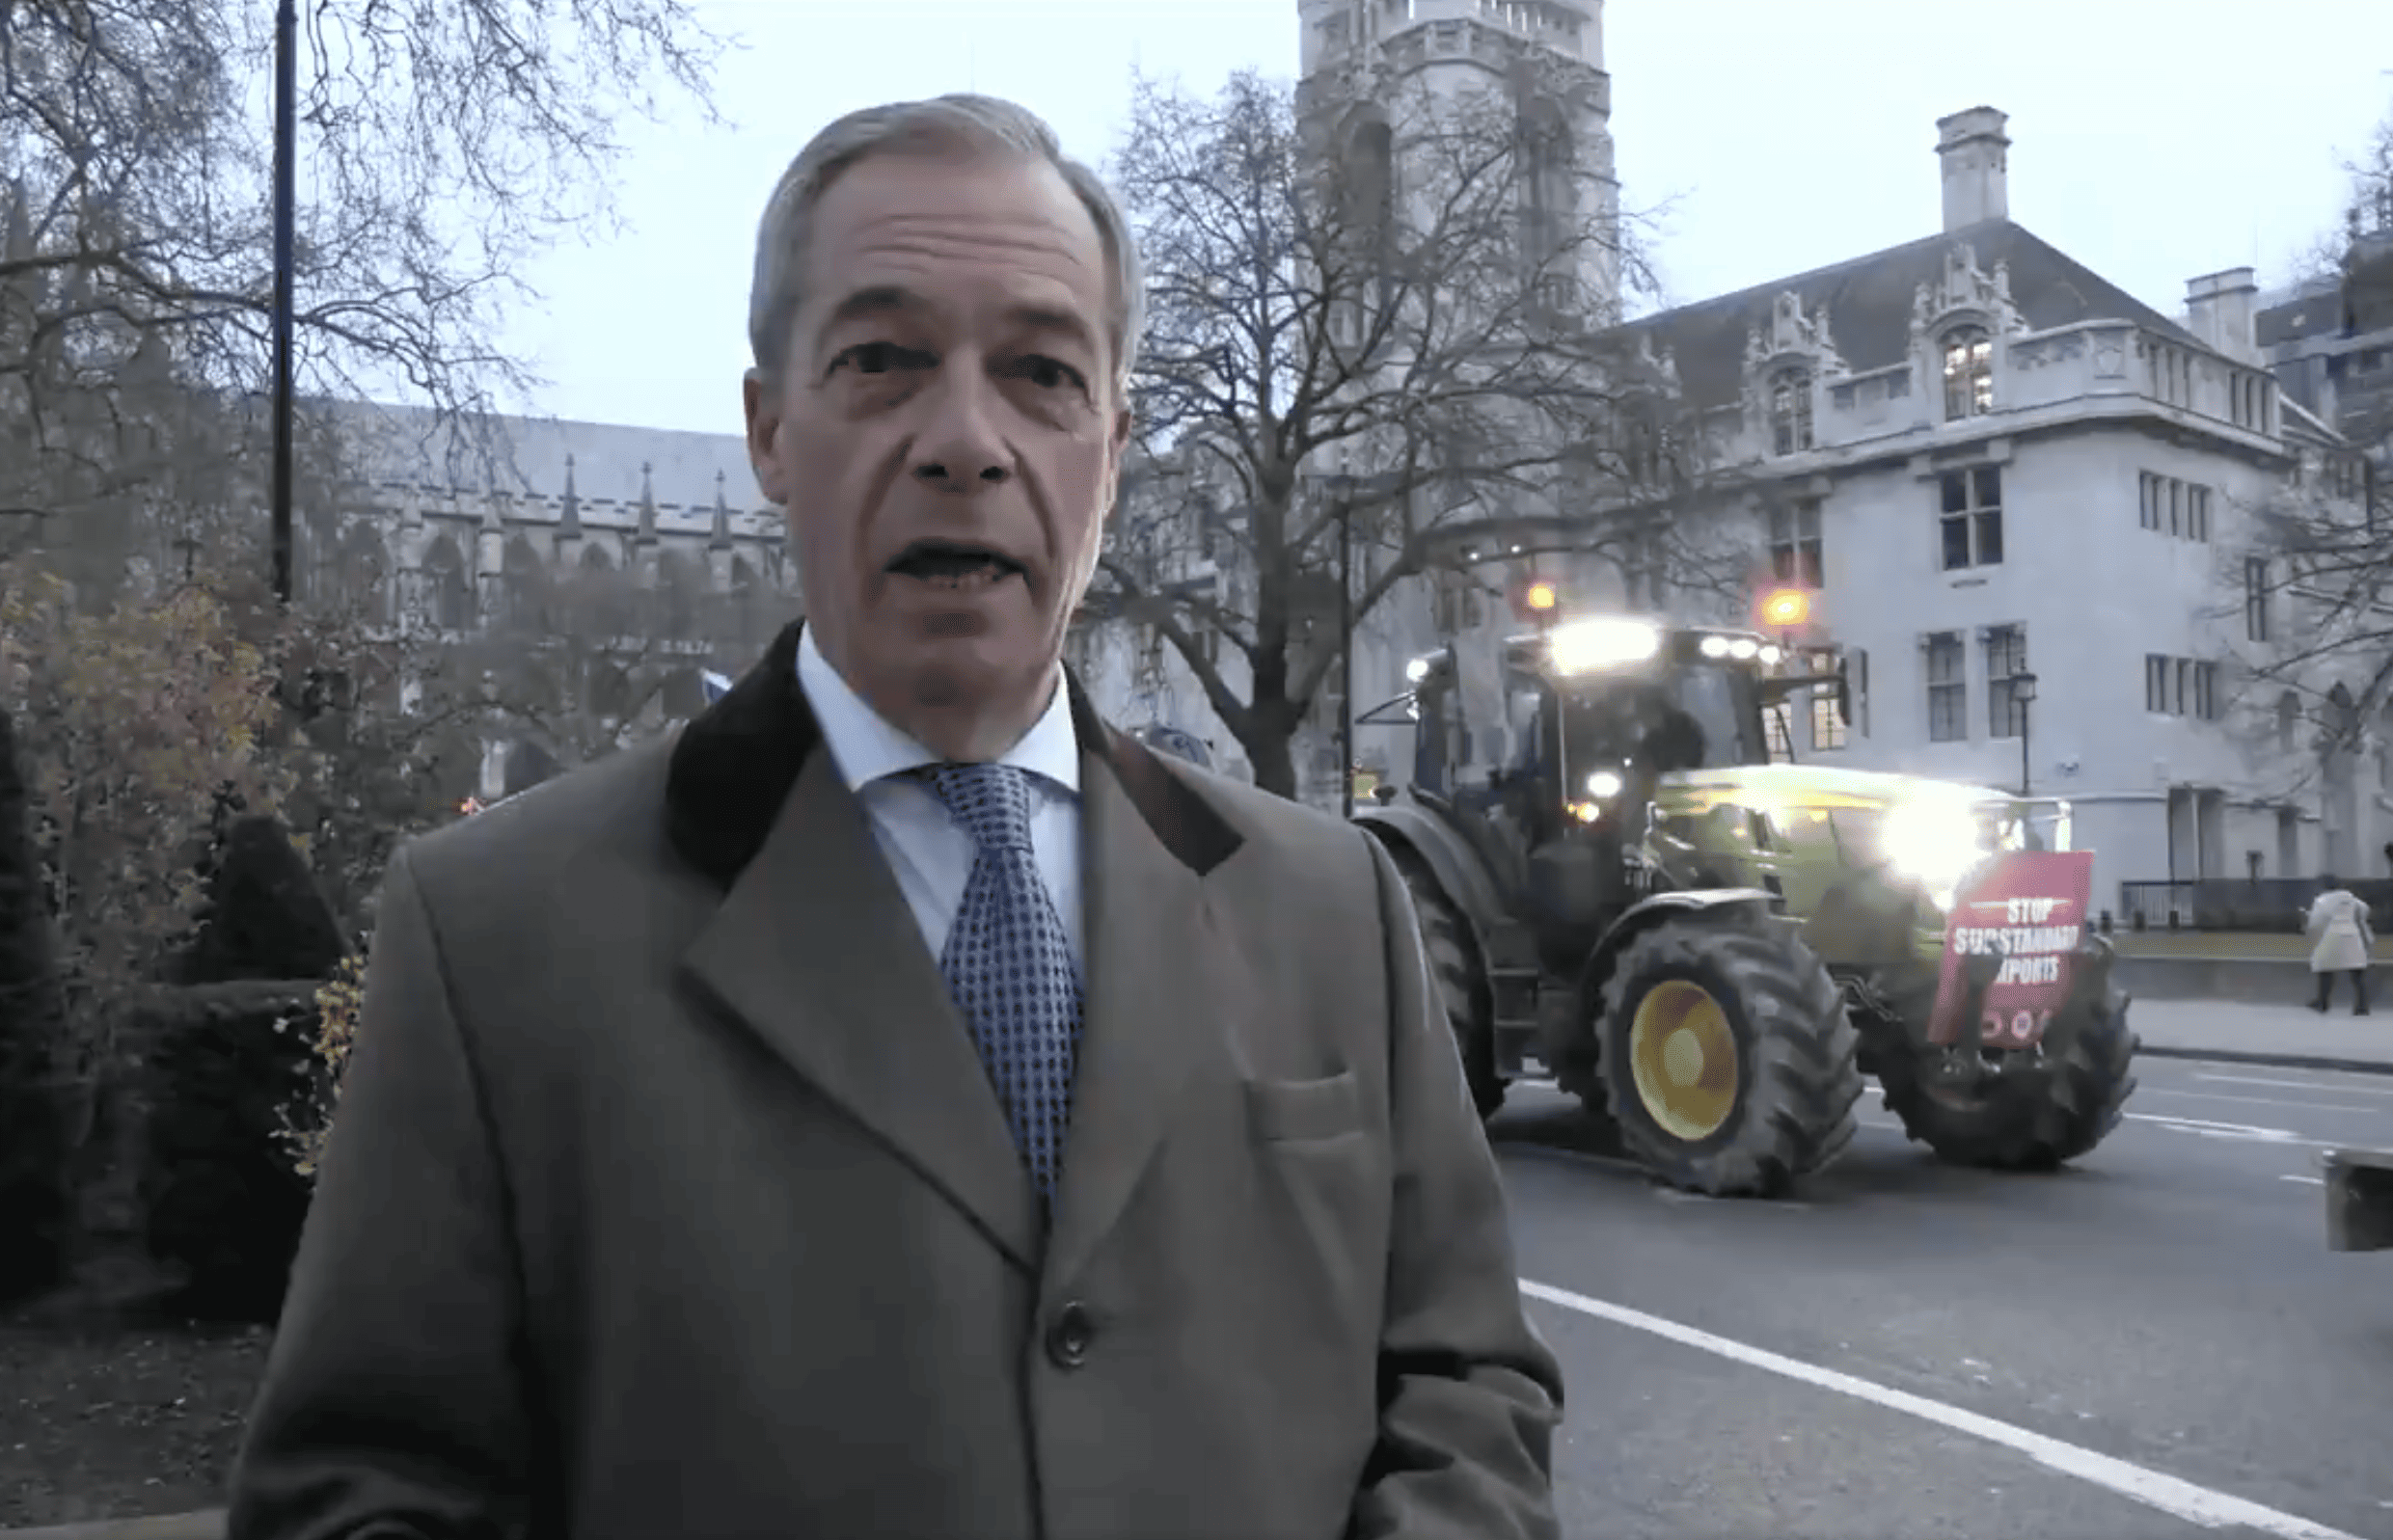 Farage cuts a puzzled figure as he turns up to tractor protest in London